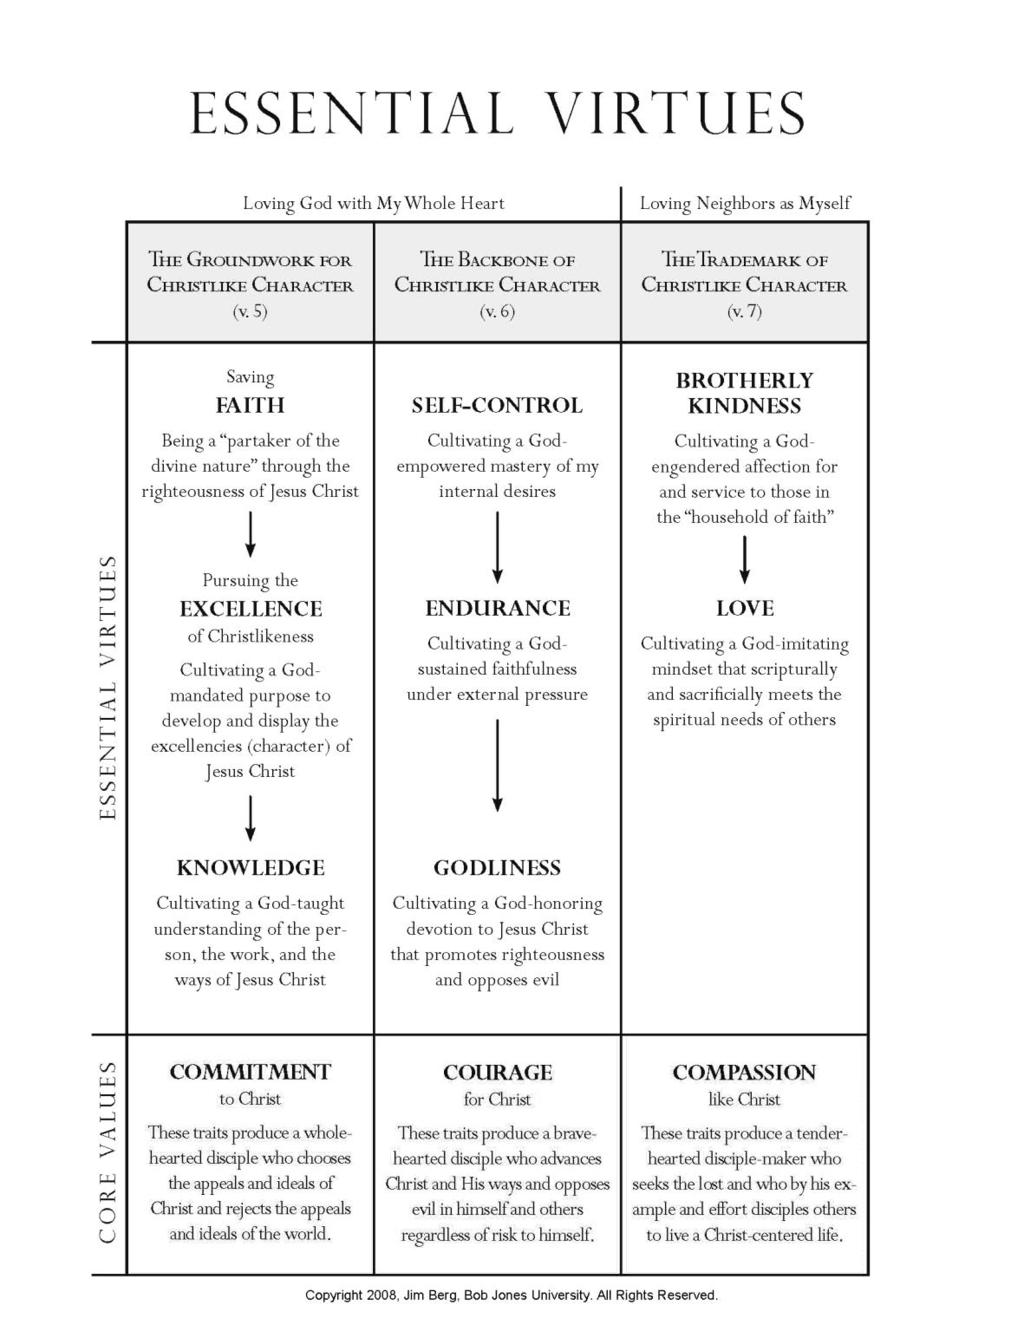 The Content of Discipleship